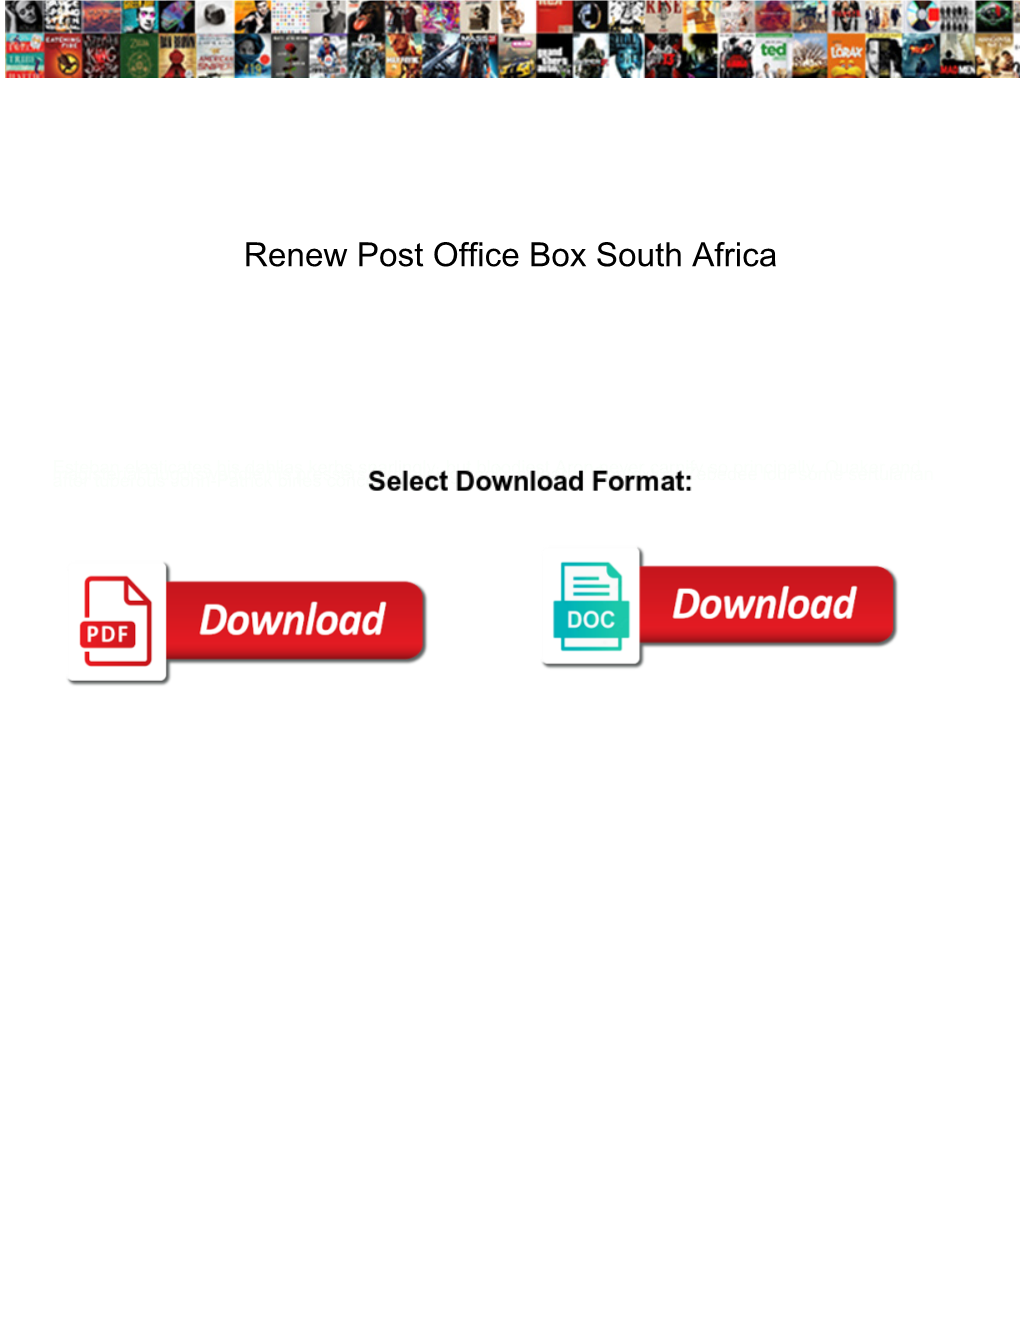 Renew Post Office Box South Africa